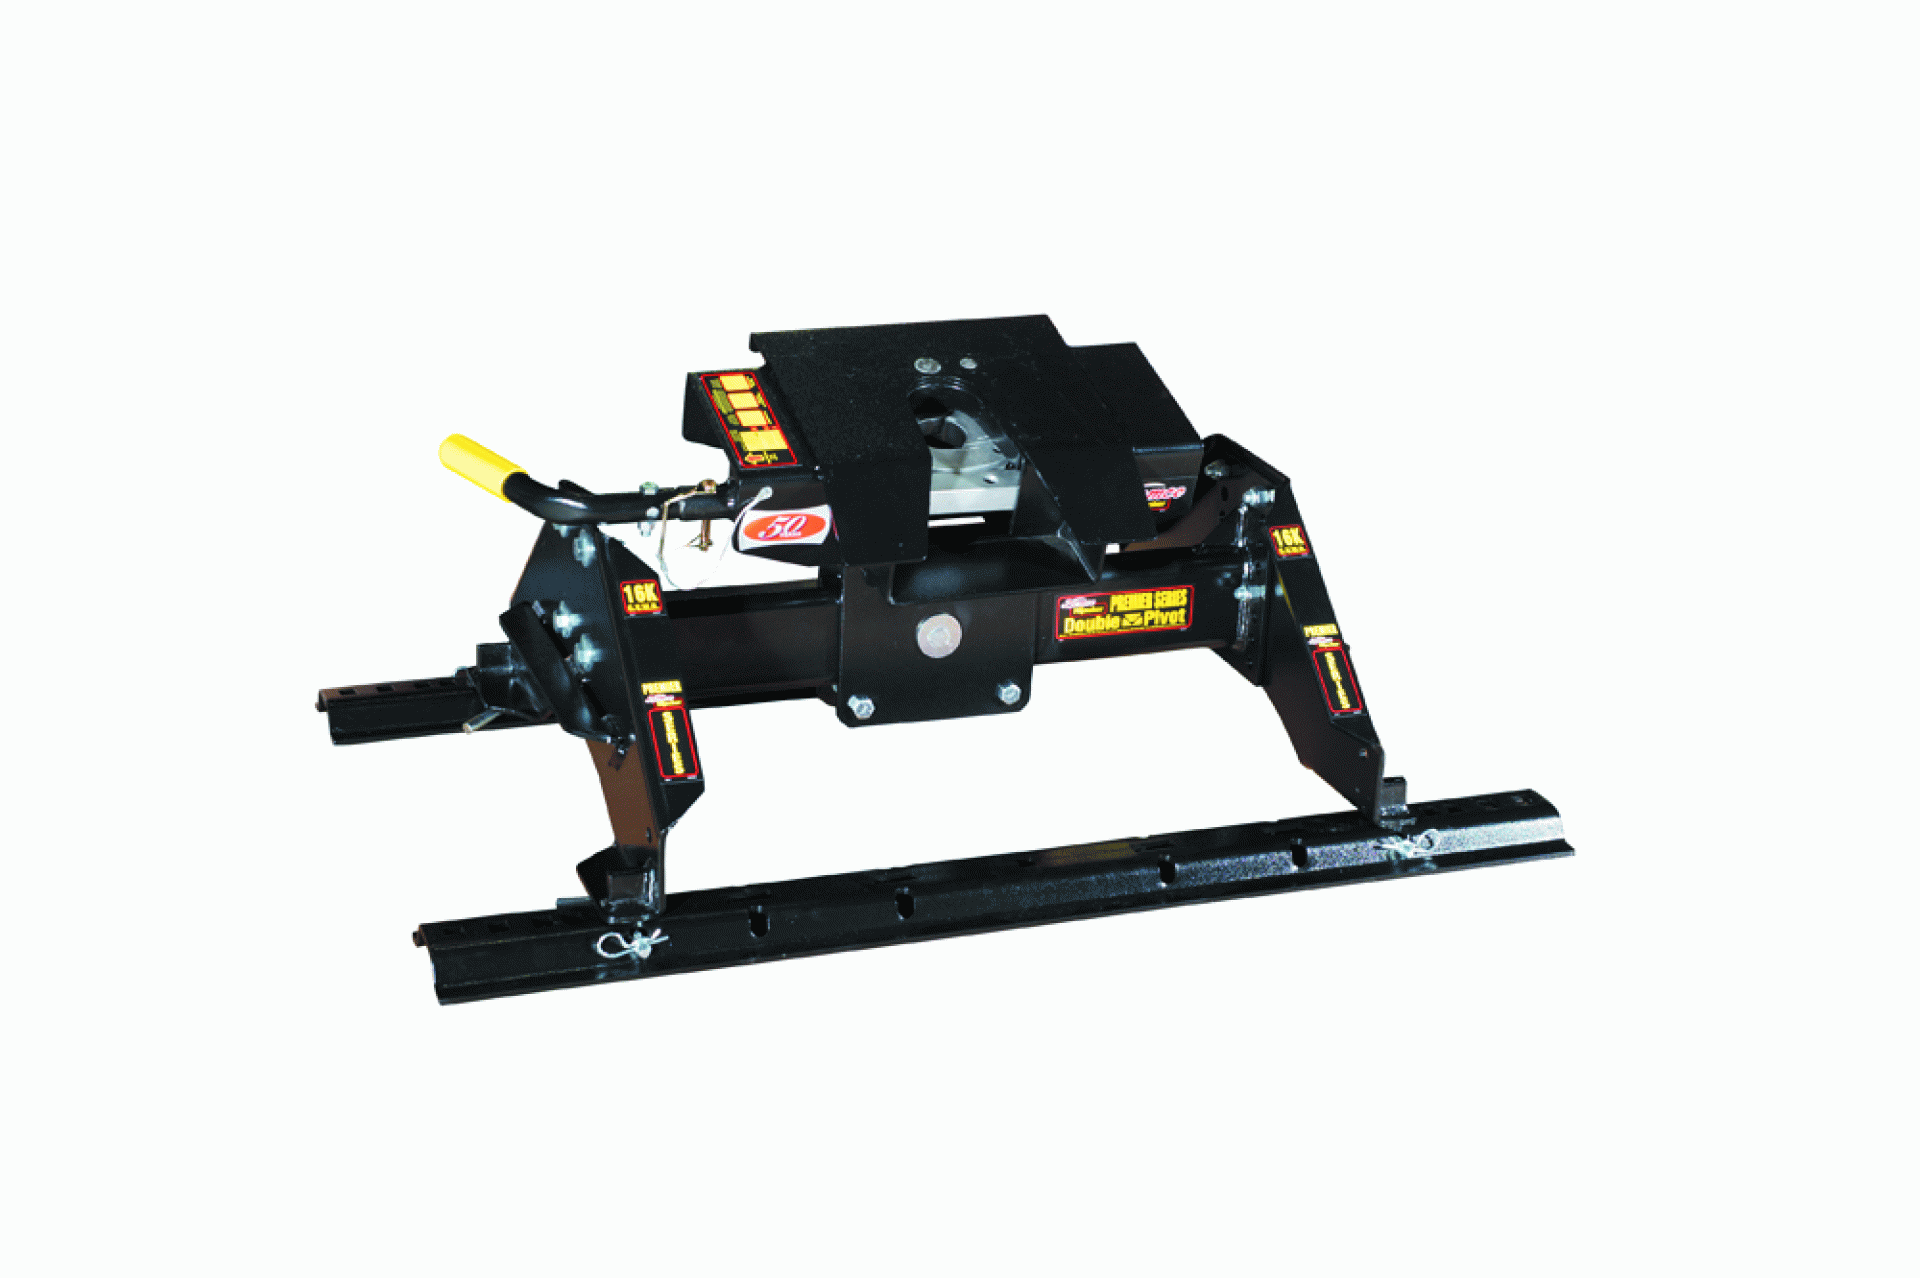 DEMCO TOWING PRODUCTS | 8550025 | HiJacker 16K Stationary 5th Wheel Hitch Industry Standard Rails (Rails Included)